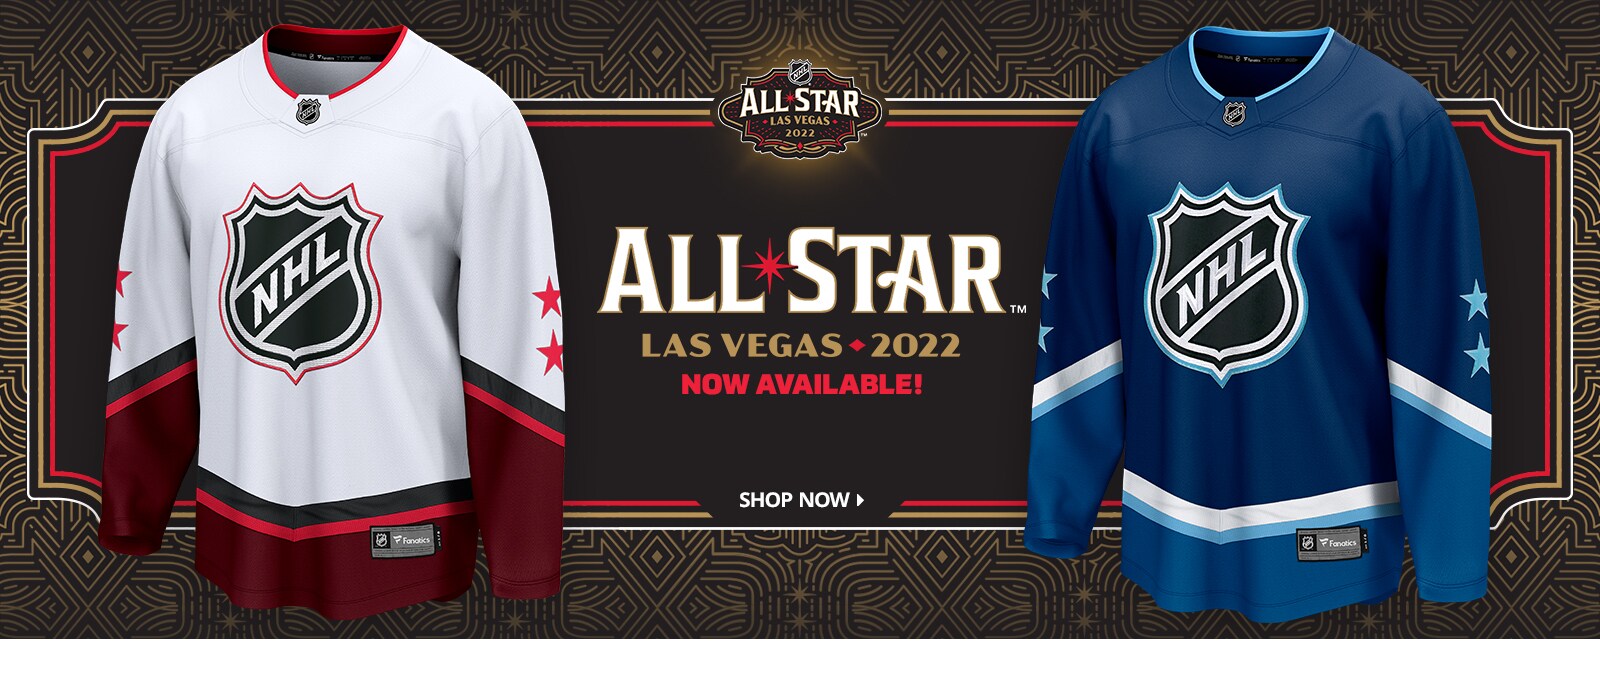 NHL All-Star Las Vegas 2022 Now Available Shop Now